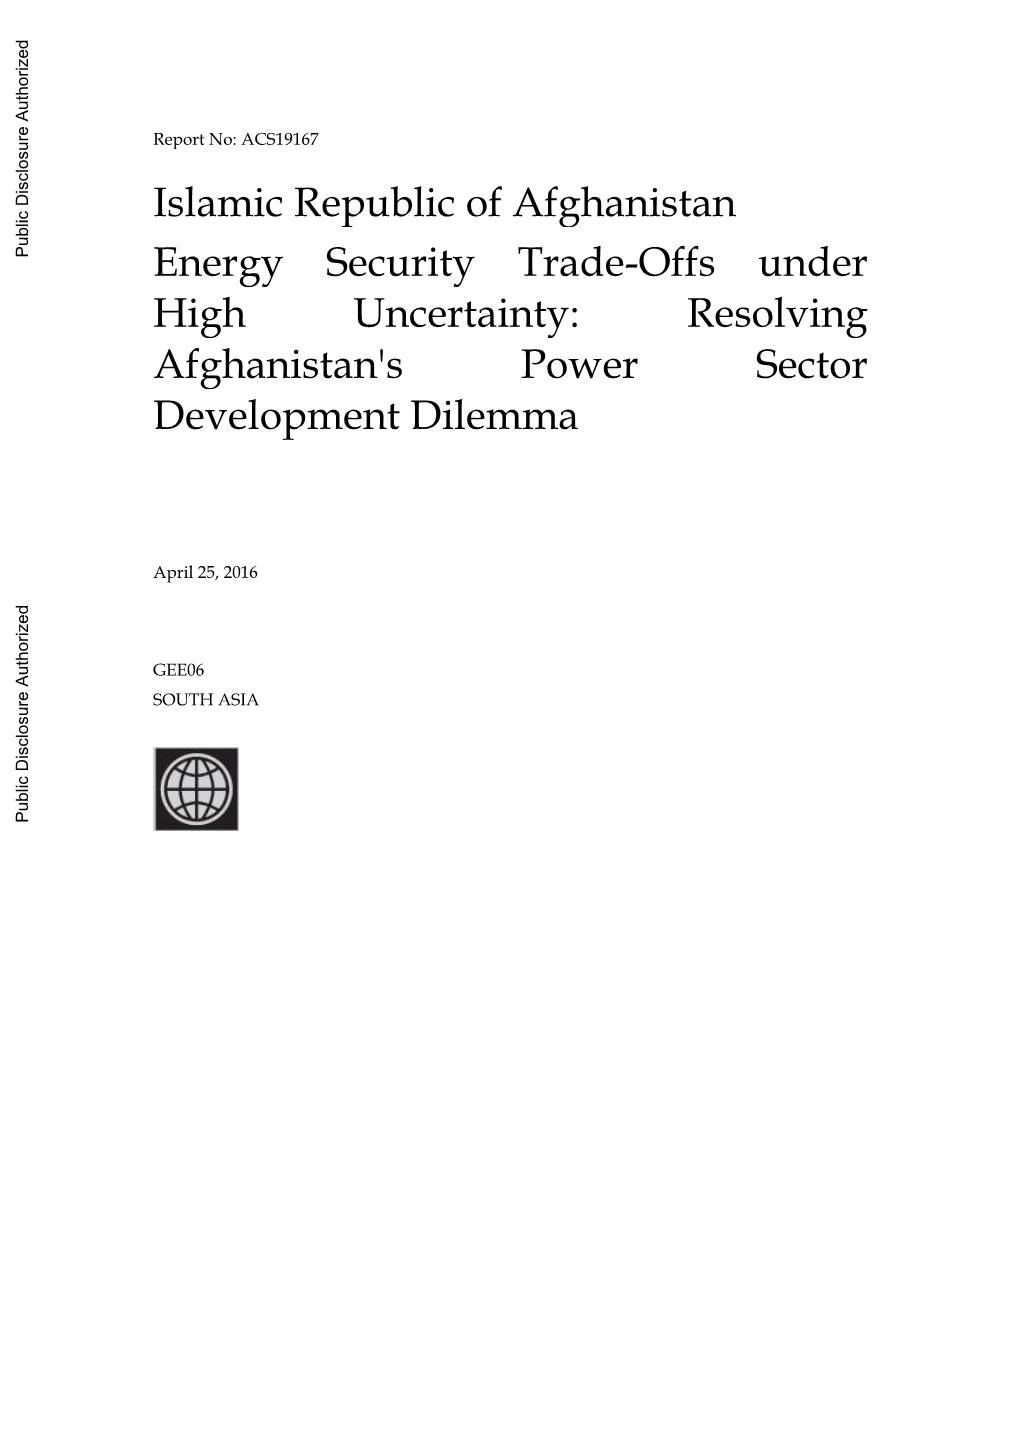 Islamic Republic of Afghanistan Energy Security Trade-Offs Under High Uncertainty